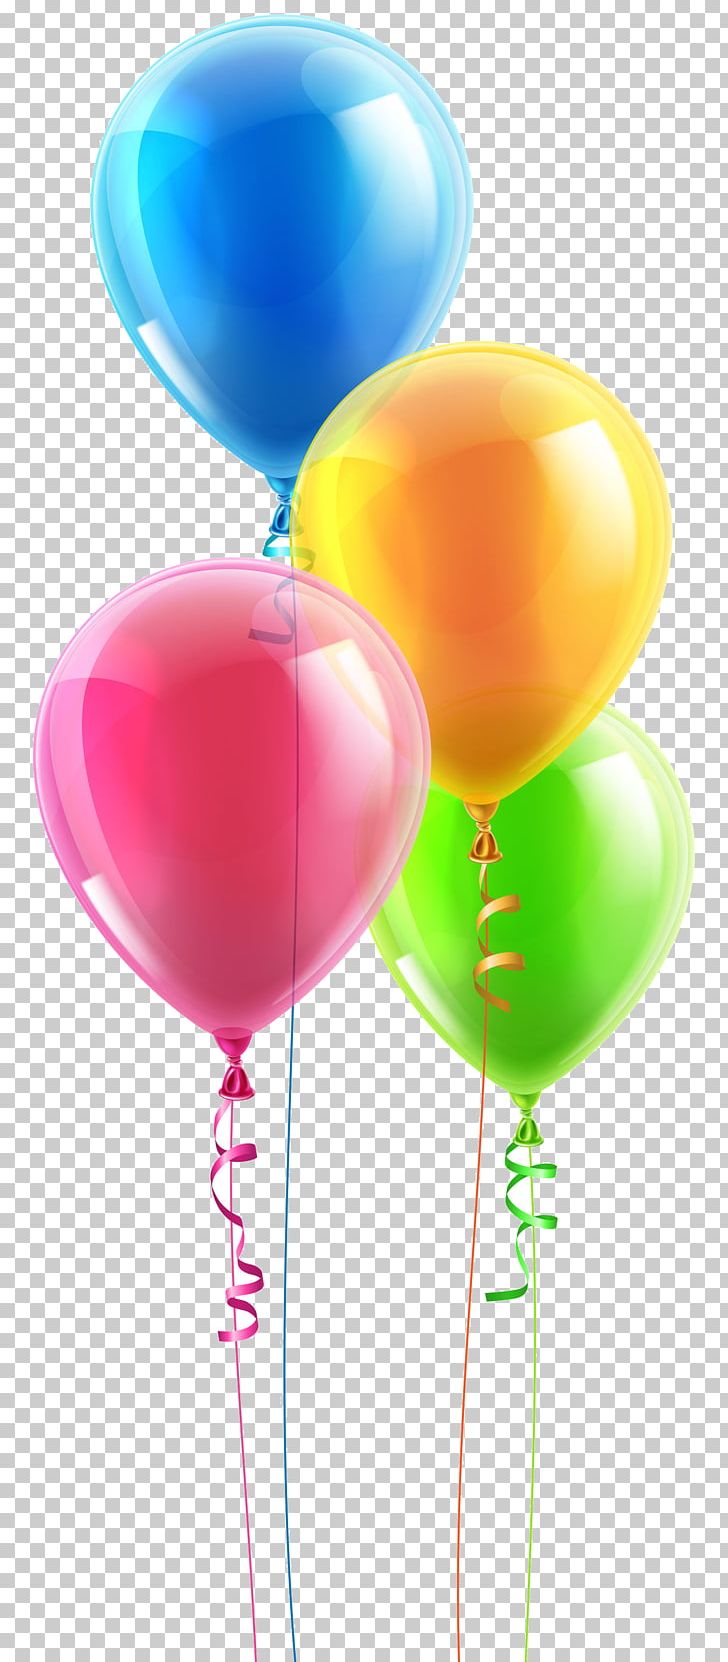 Stock Photography Balloon Illustration PNG, Clipart, Balloon, Birthday, Birthday Party, Objects, Party Free PNG Download